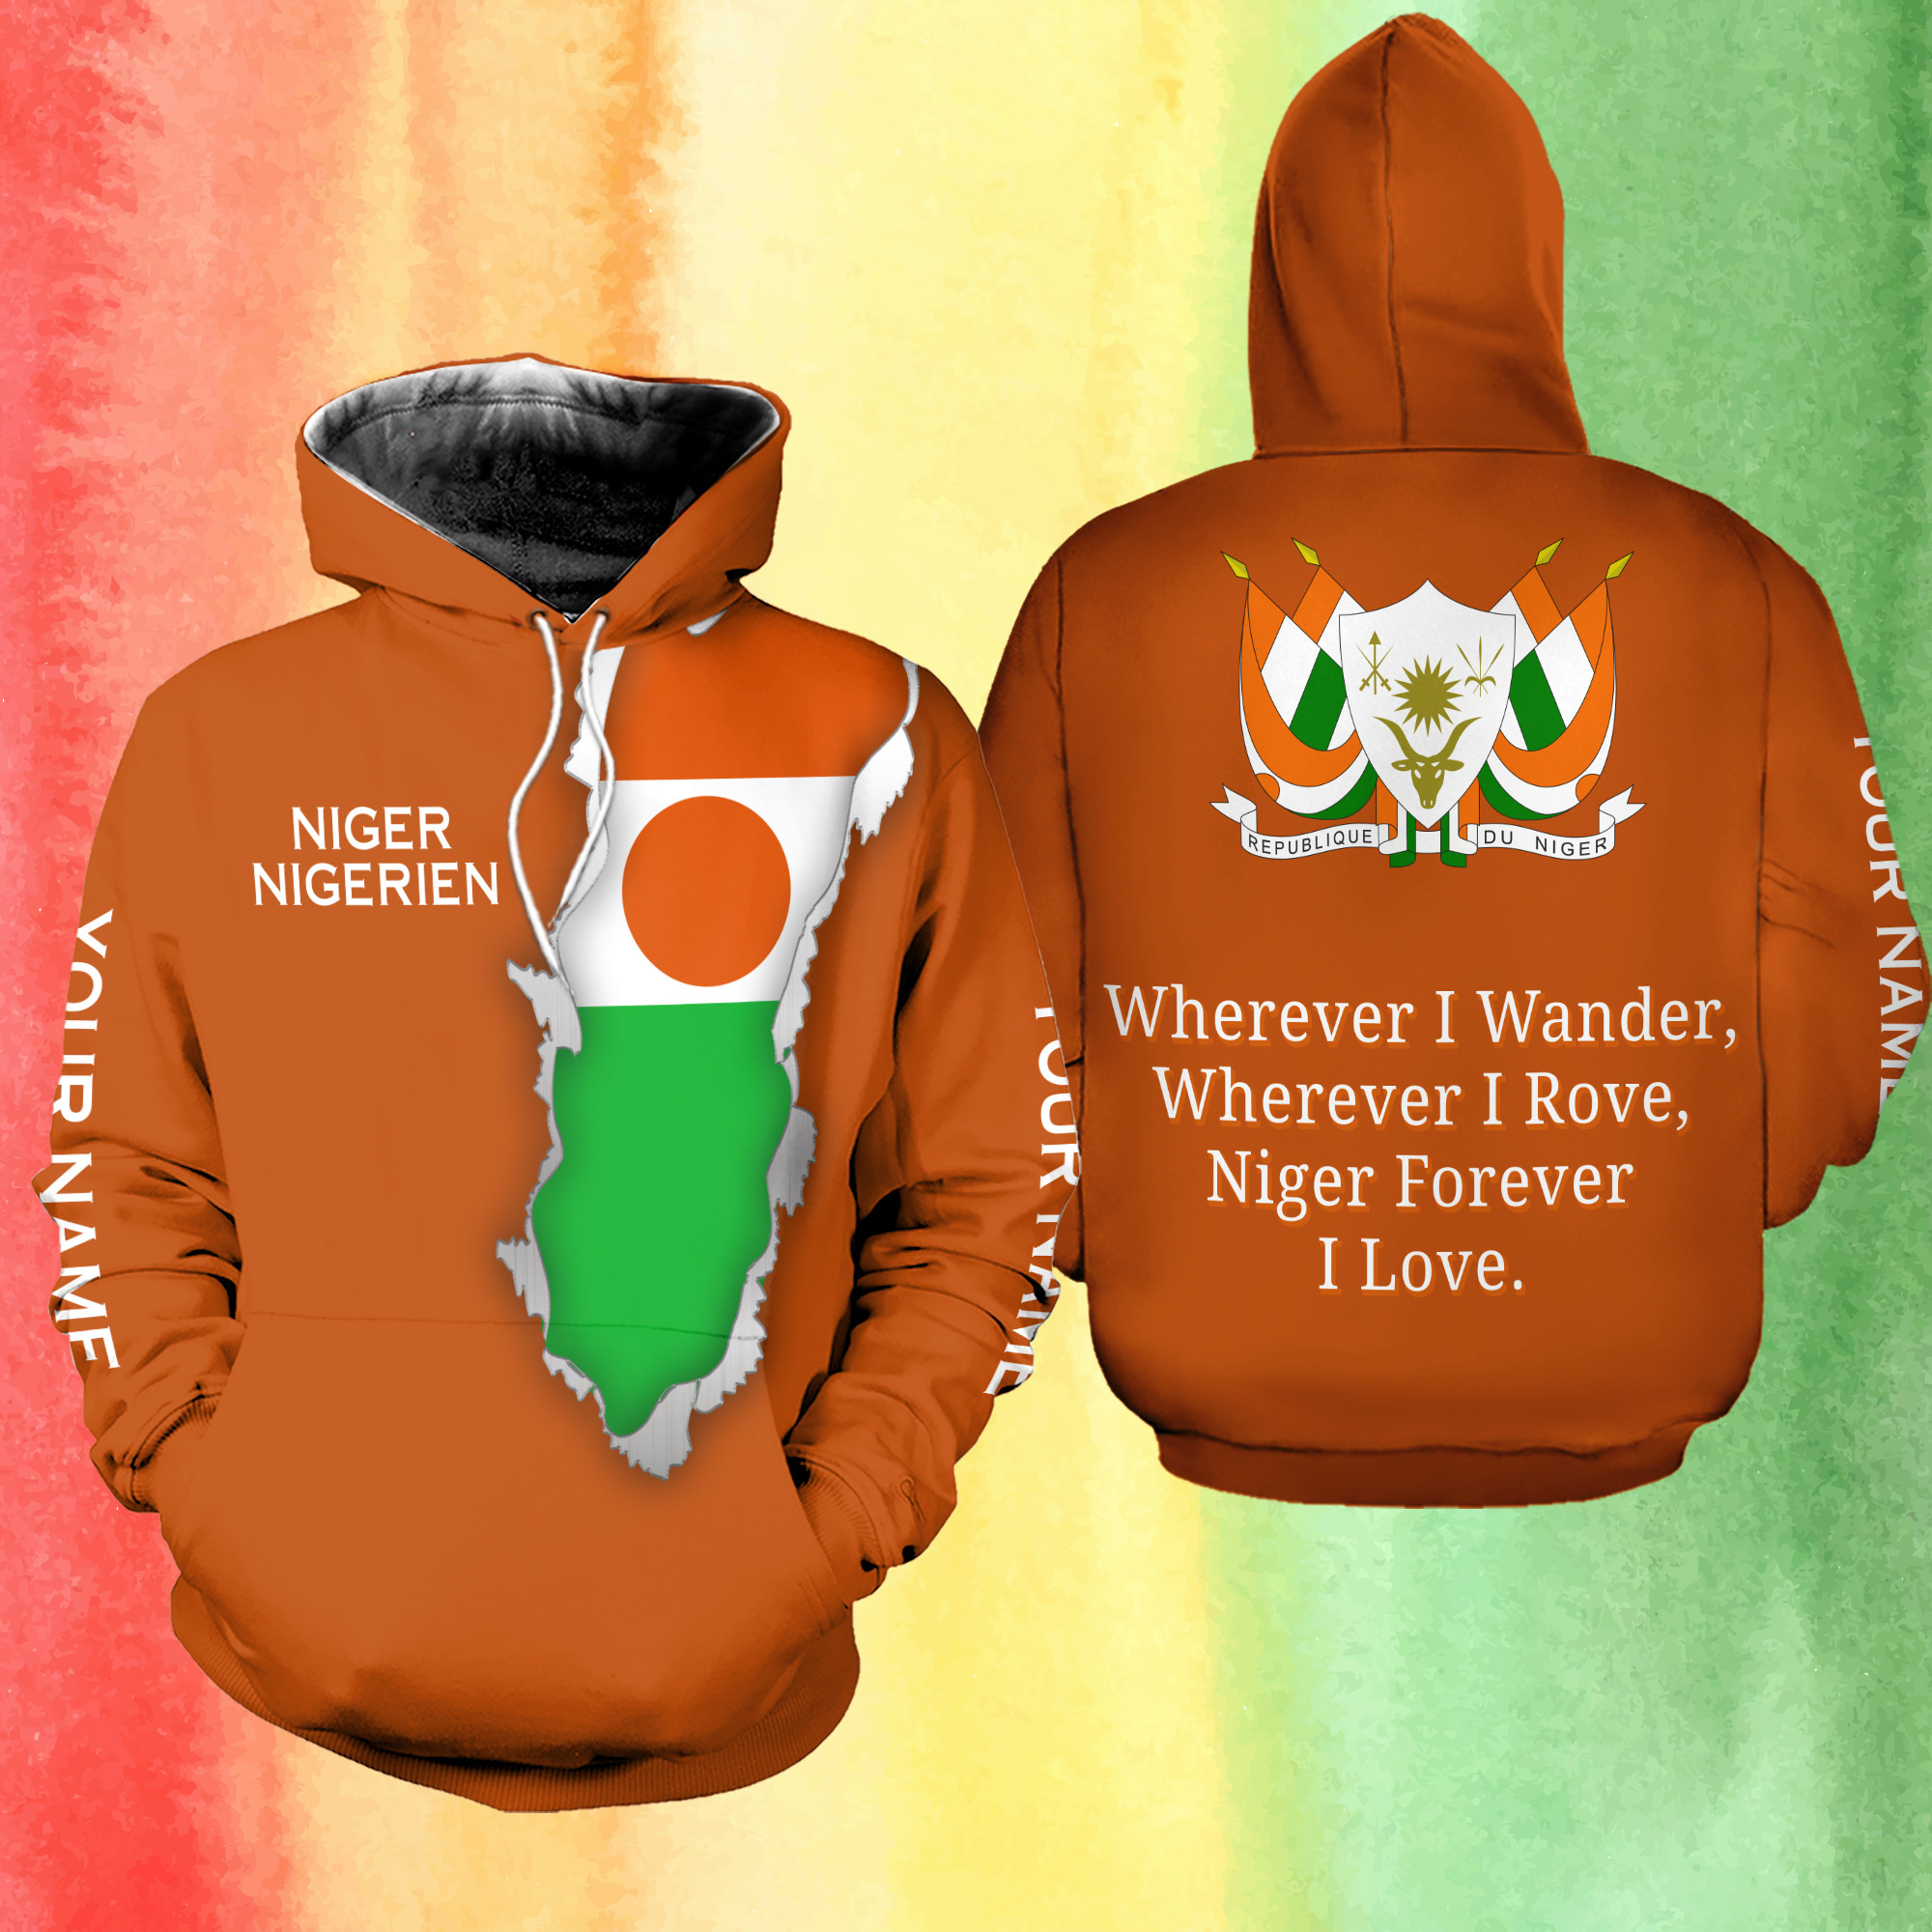 Personalized Africa Niger African Nigerien Outfit 3D Hoodie